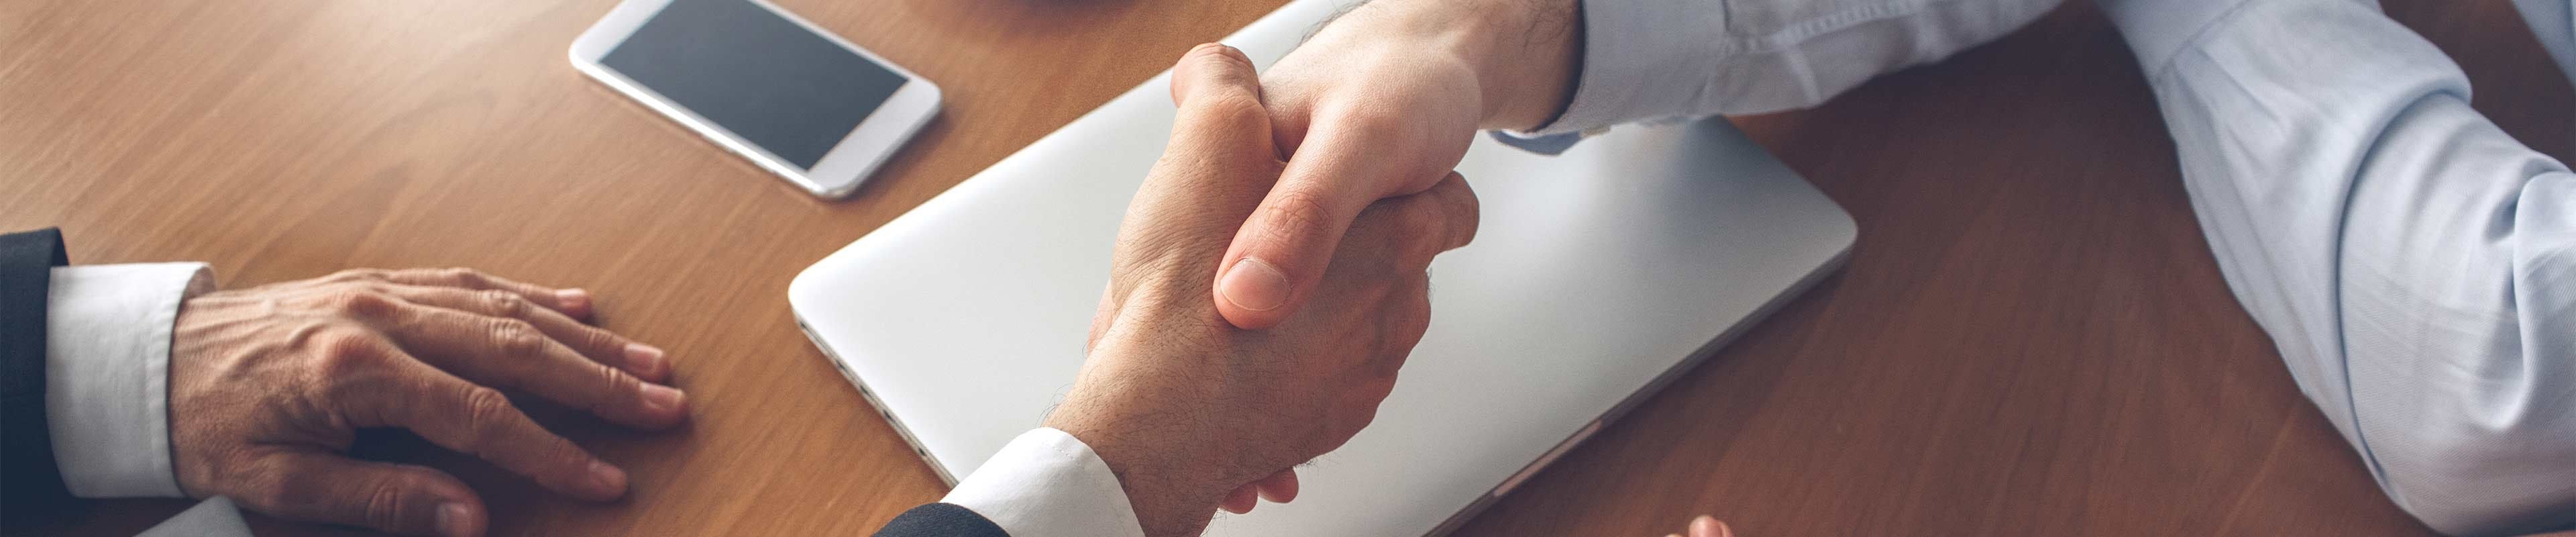 Two men shake hands after selling a home